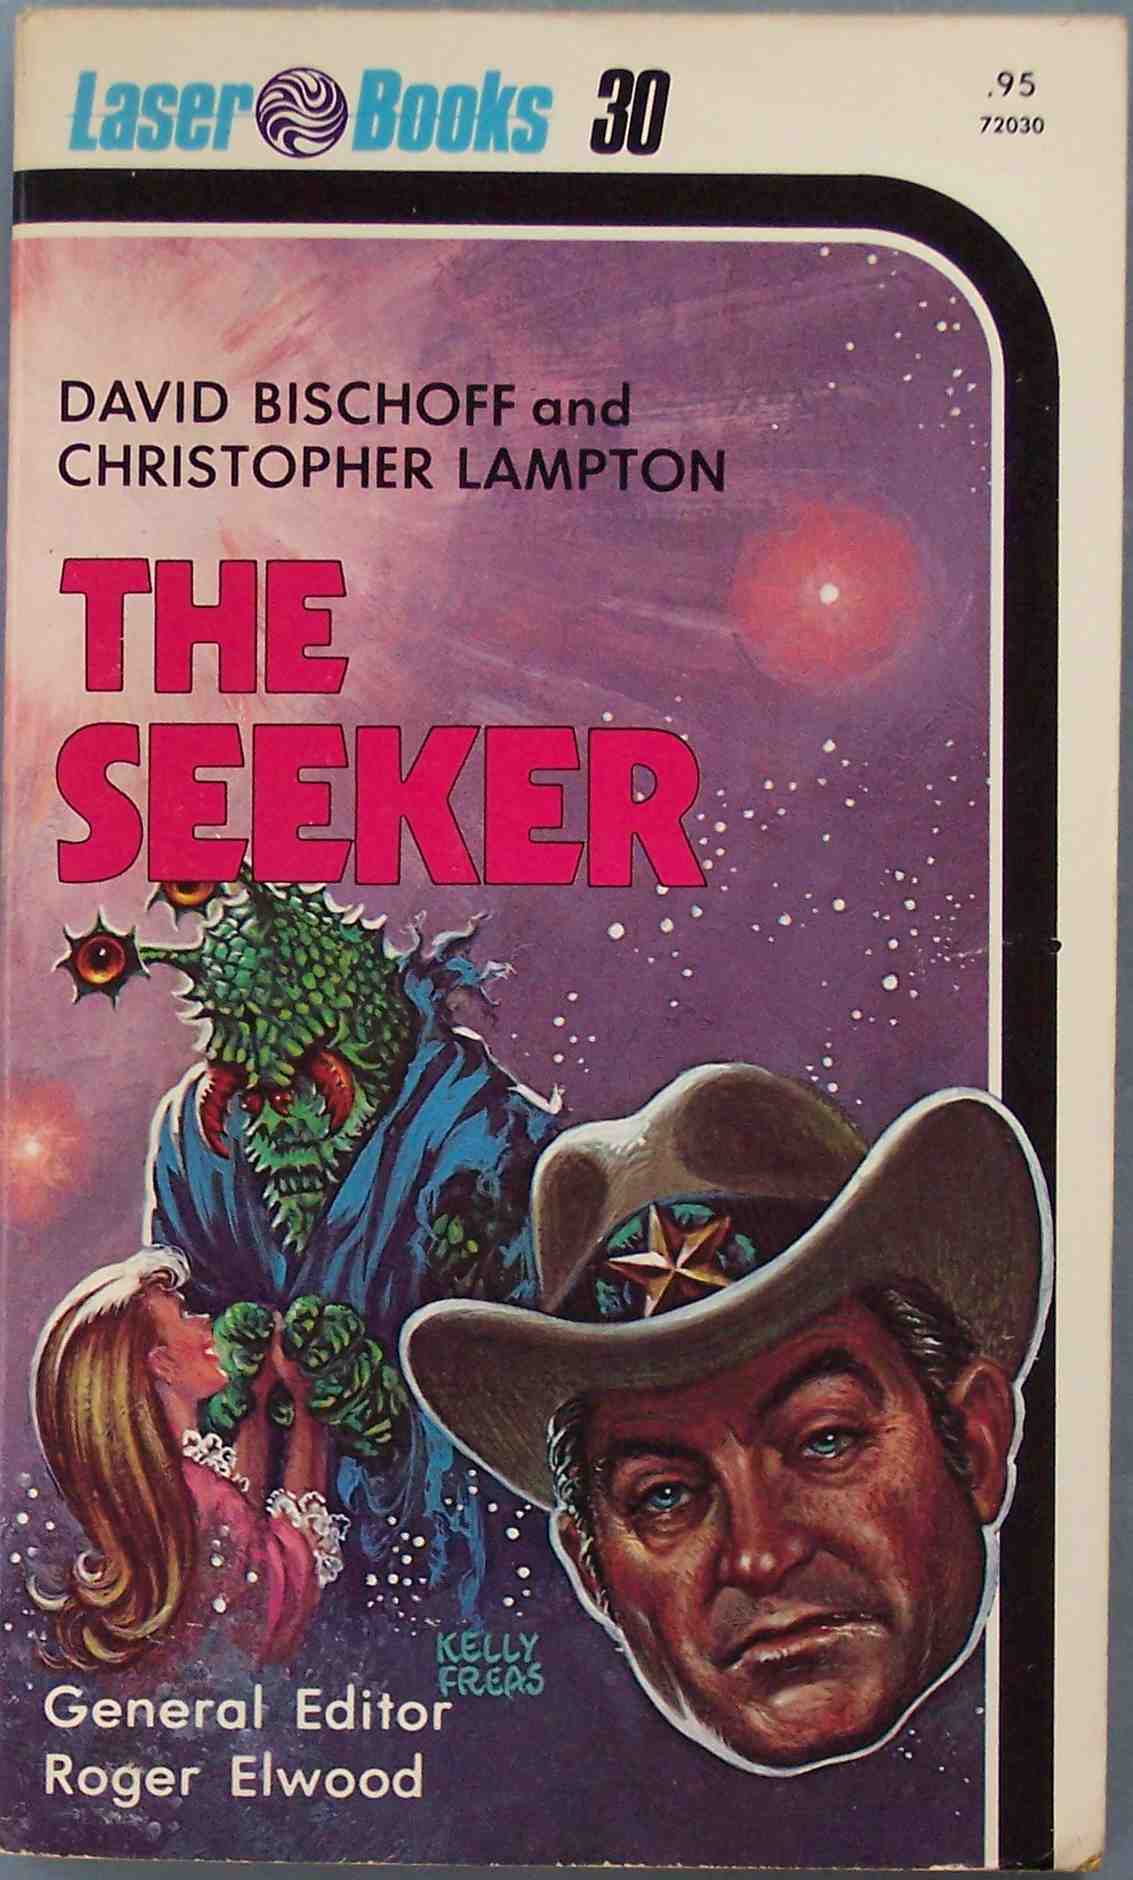 the geeker paperback by david bischoff and his brother, guy - brother lampton